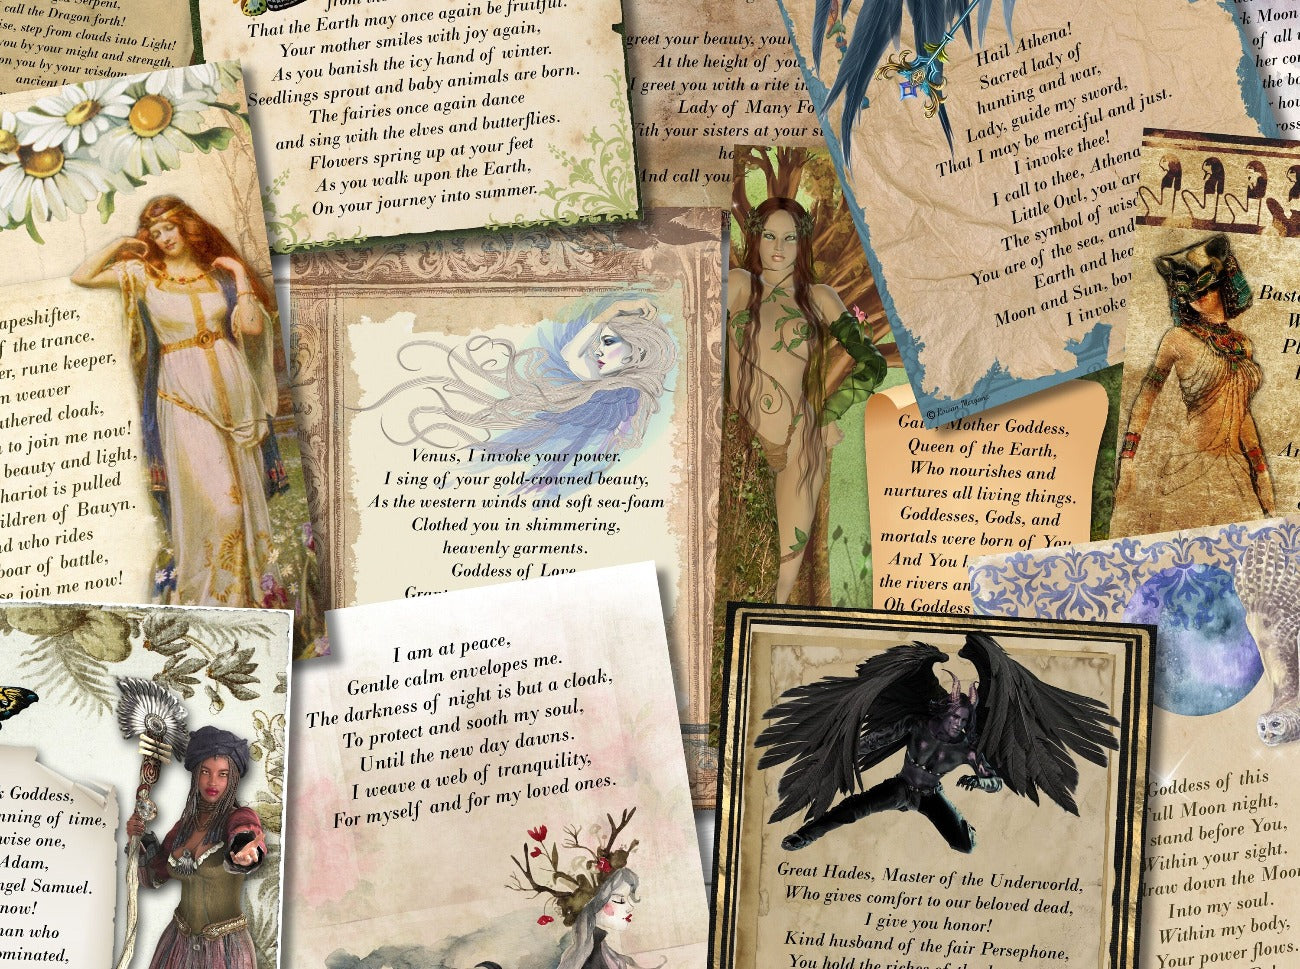 ALTAR PRAYER CARDS – 16 Wicca Pagan Deity Cards, close-up view showing the art and poetry detail - Morgana Magick Spell